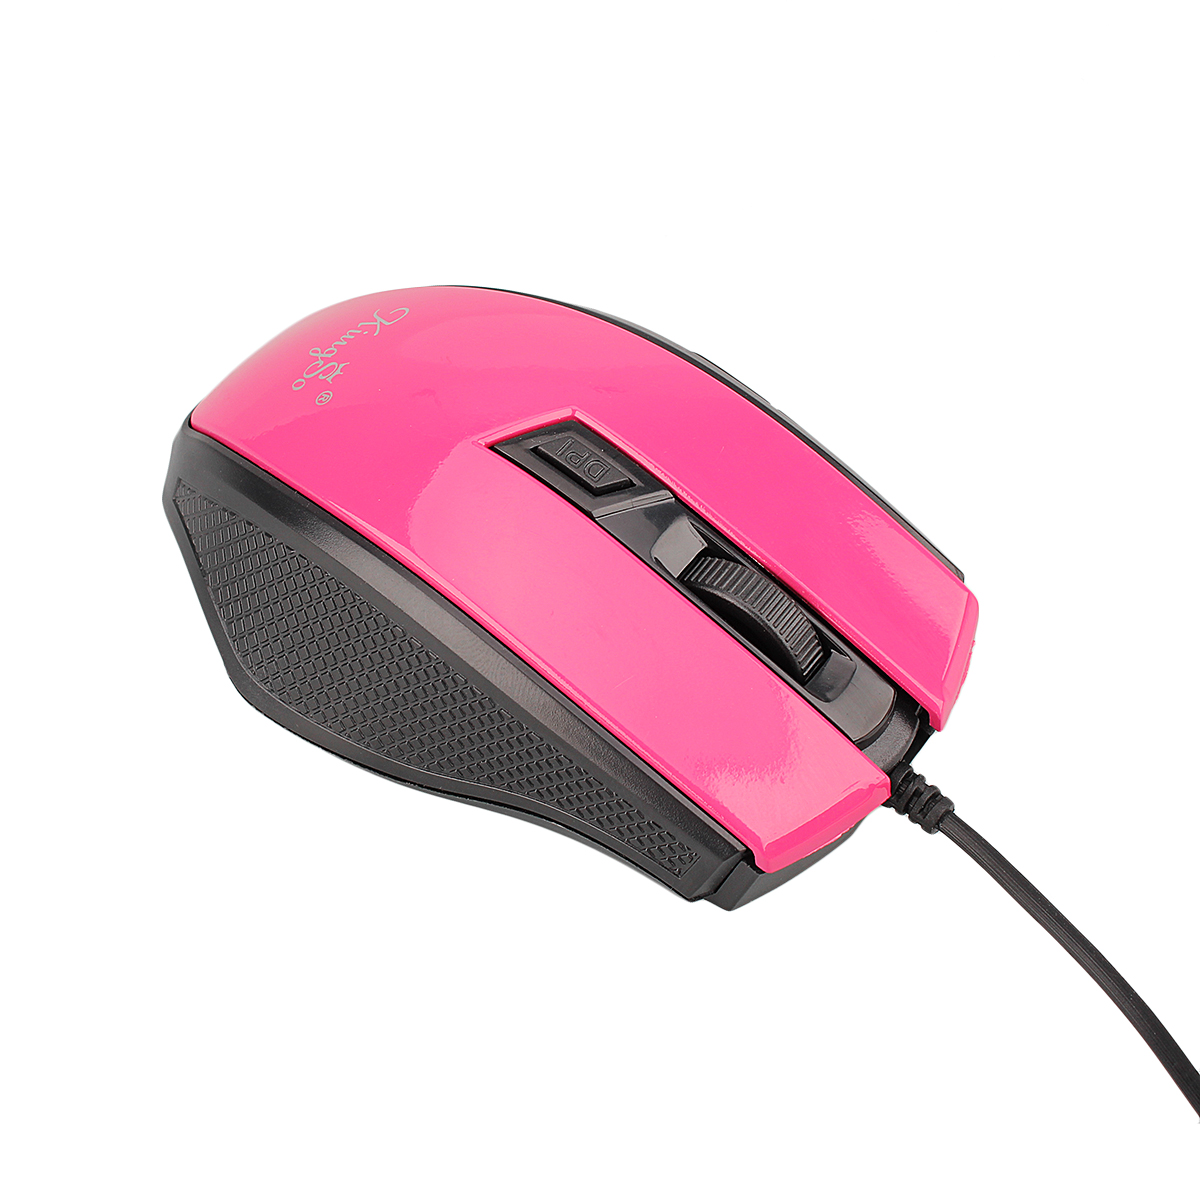 Find ELEGIANT YS 03 Wired Mouse 2400DPI 6 Buttons LED USB Wired Mouse Optical Computer Mice for Home Office for Sale on Gipsybee.com with cryptocurrencies